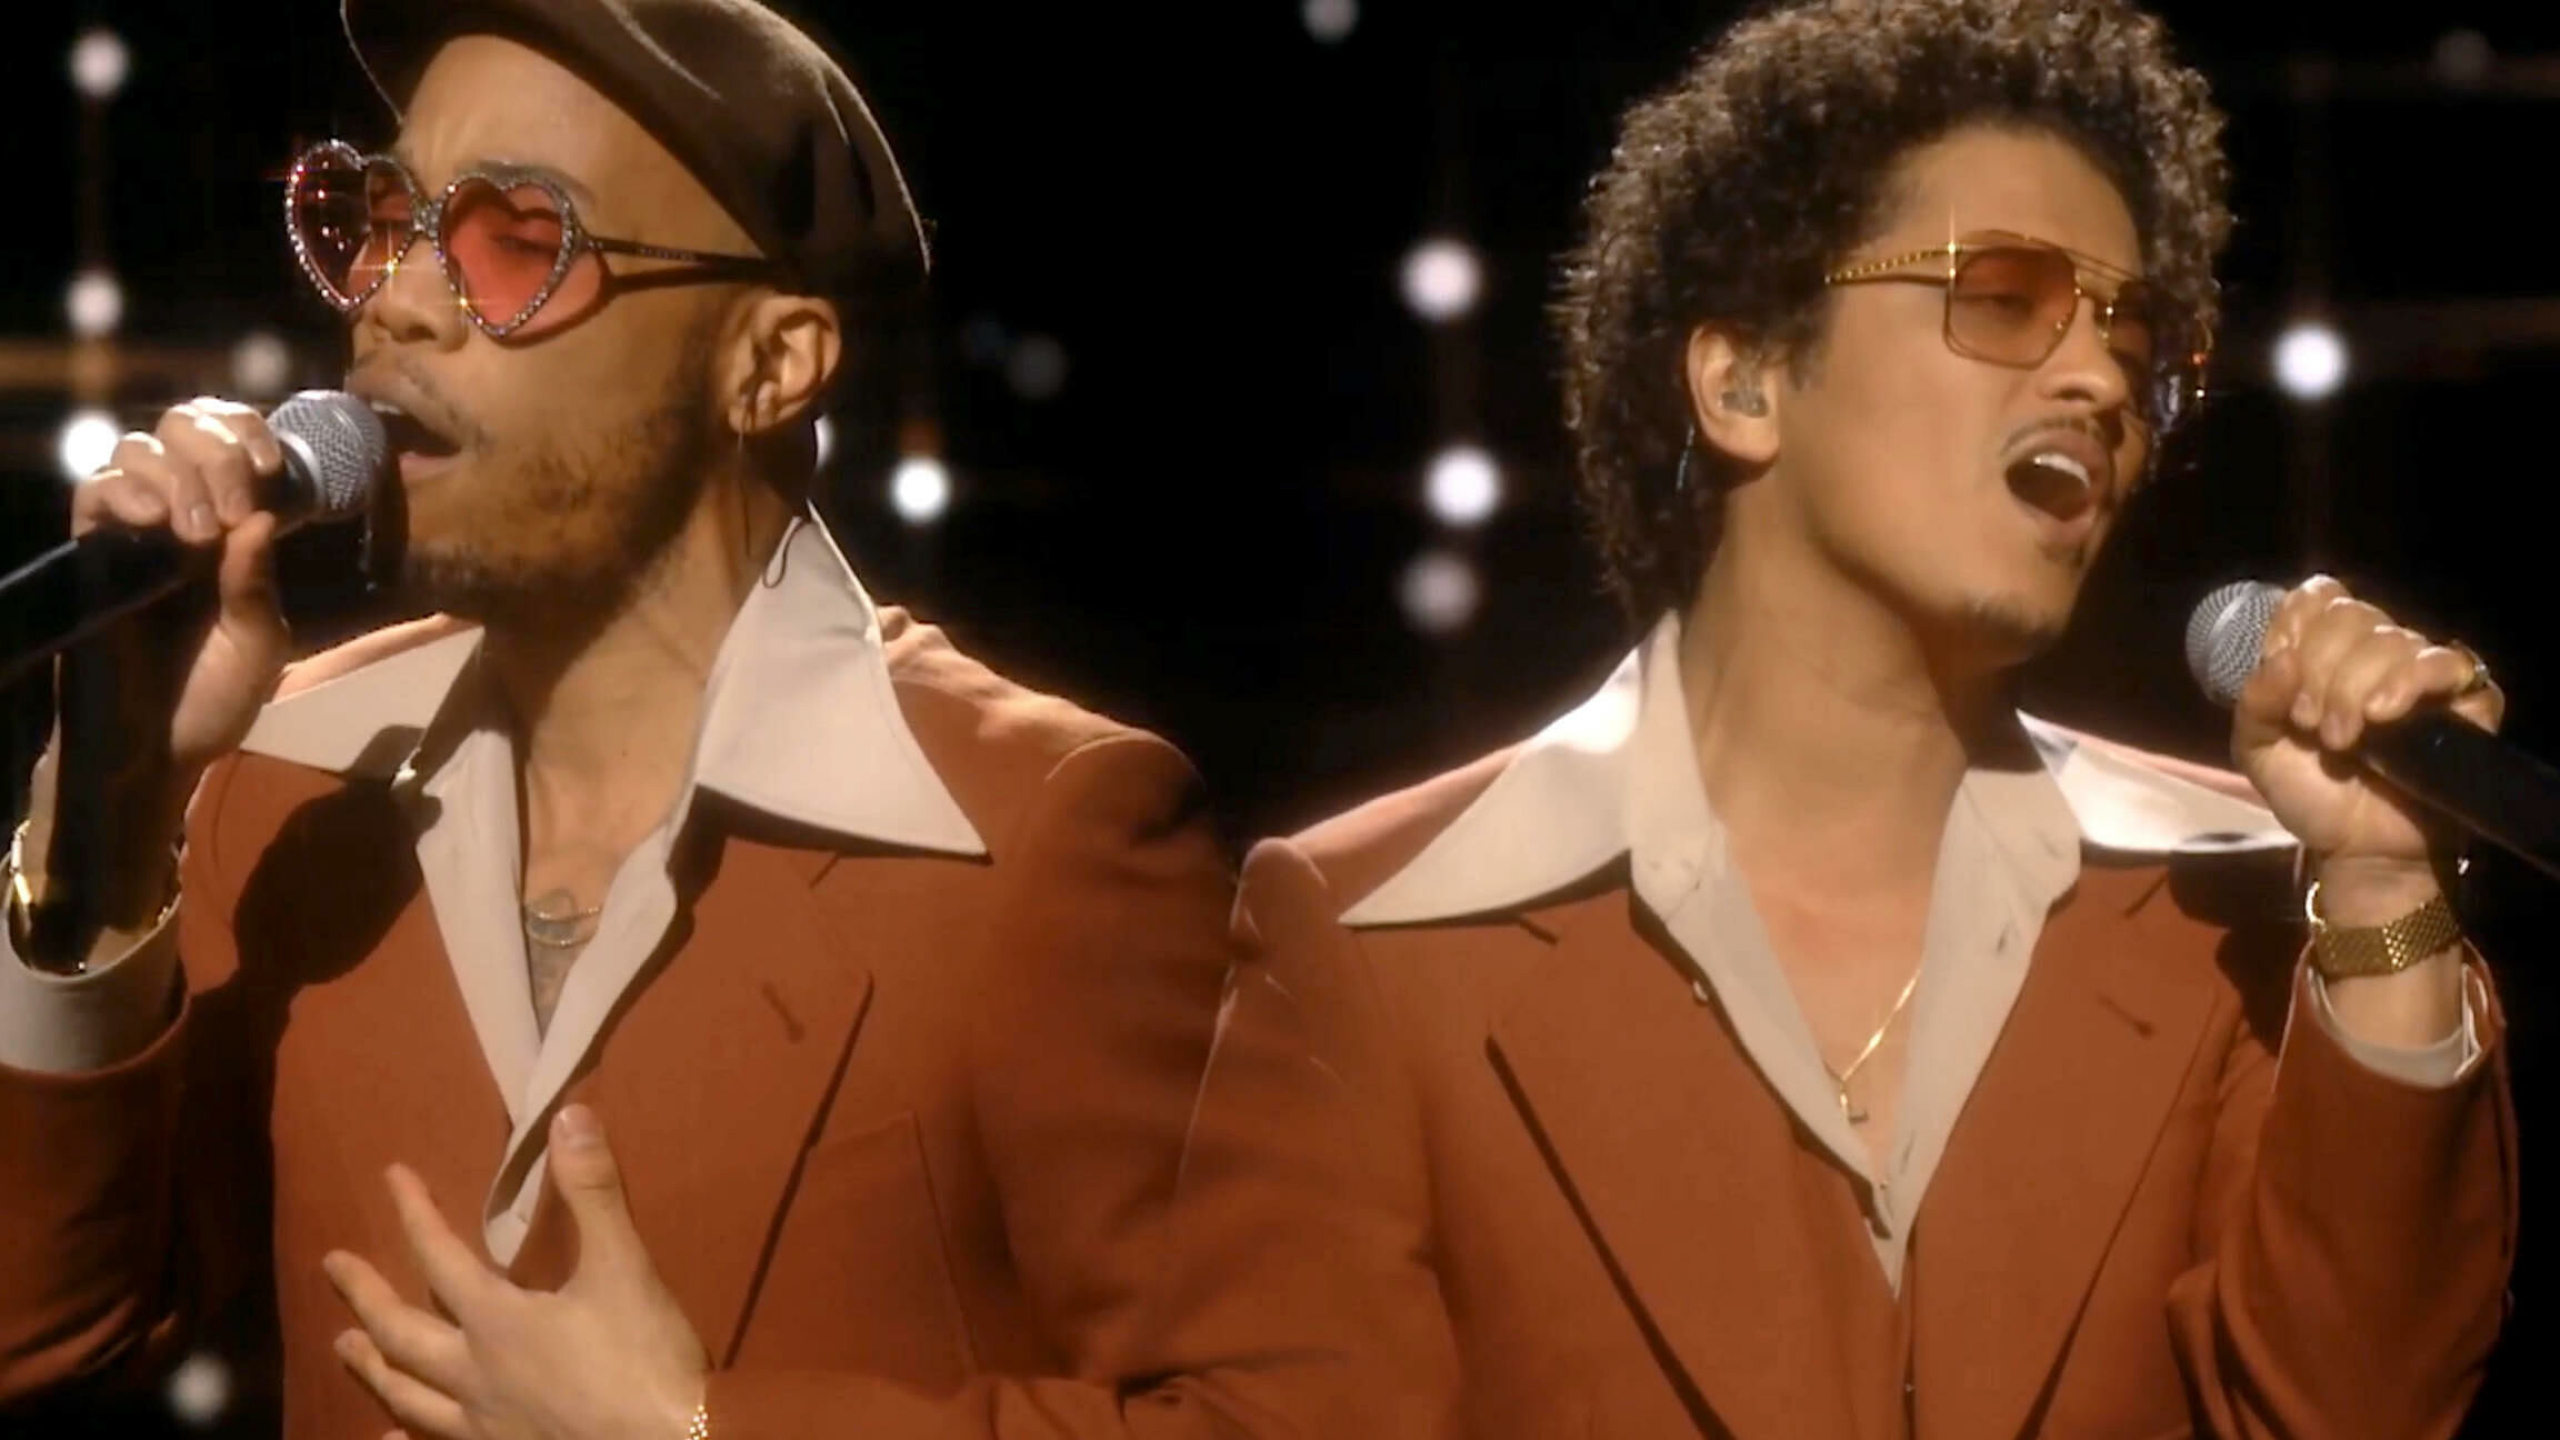 Silk Sonic: The duo performed "Leave the Door Open" at the BET Awards 2021. 2560x1440 HD Wallpaper.